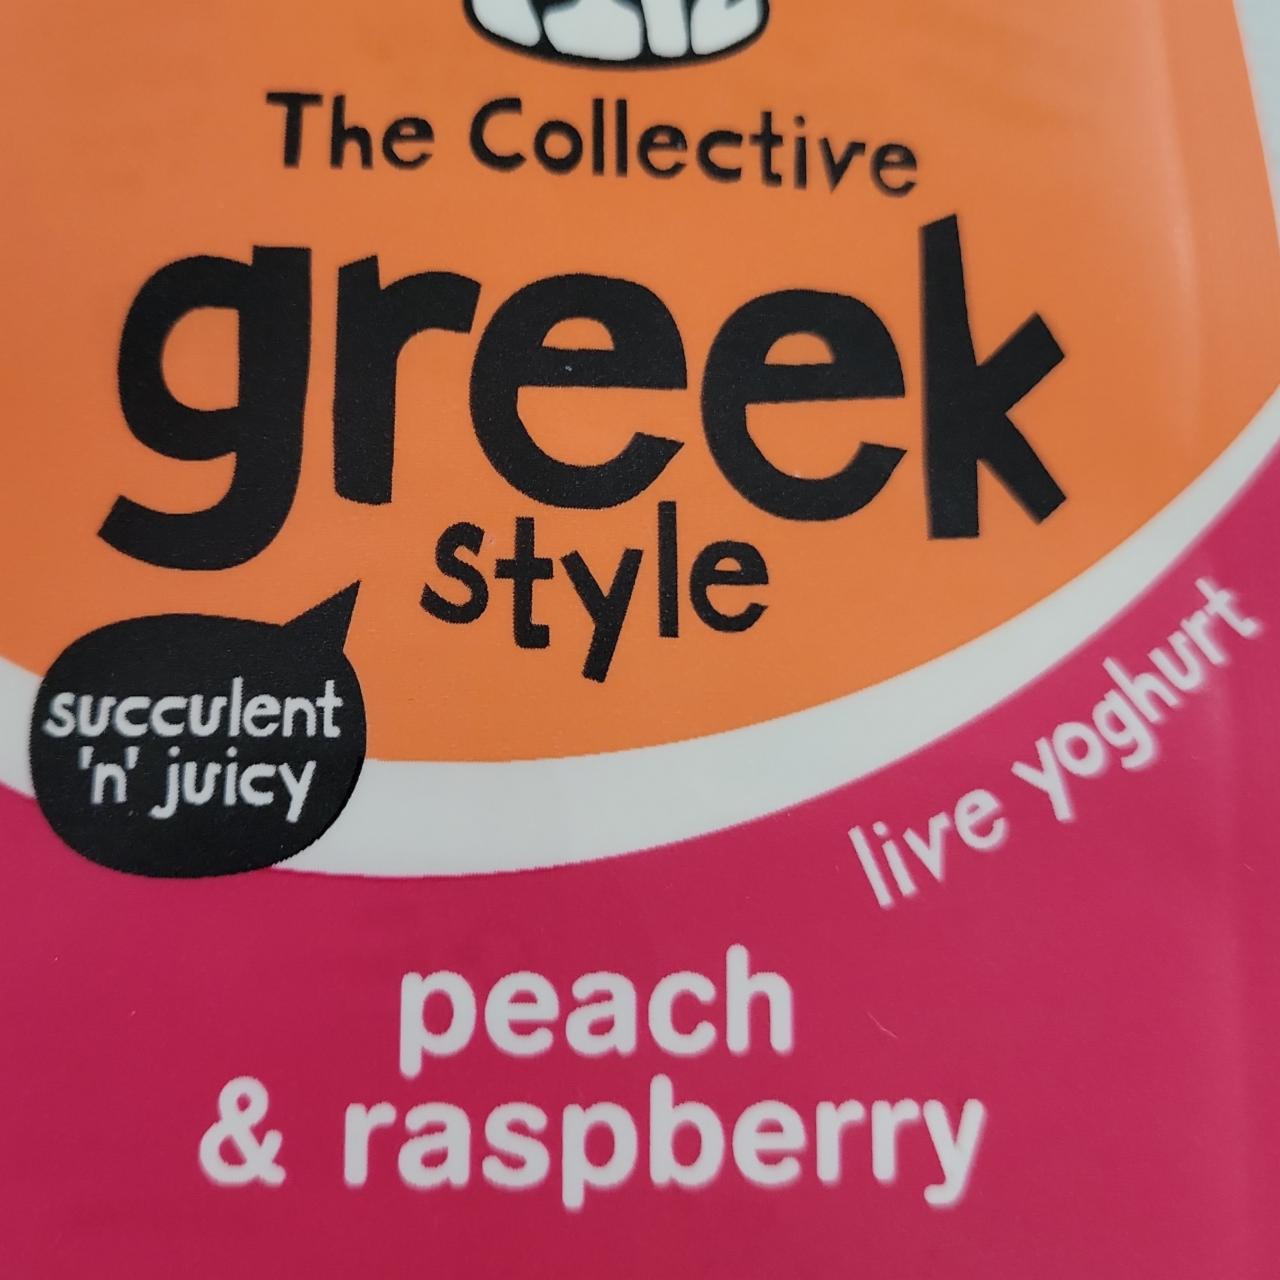 Fotografie - Peach & Raspberry The Collective Greek Style